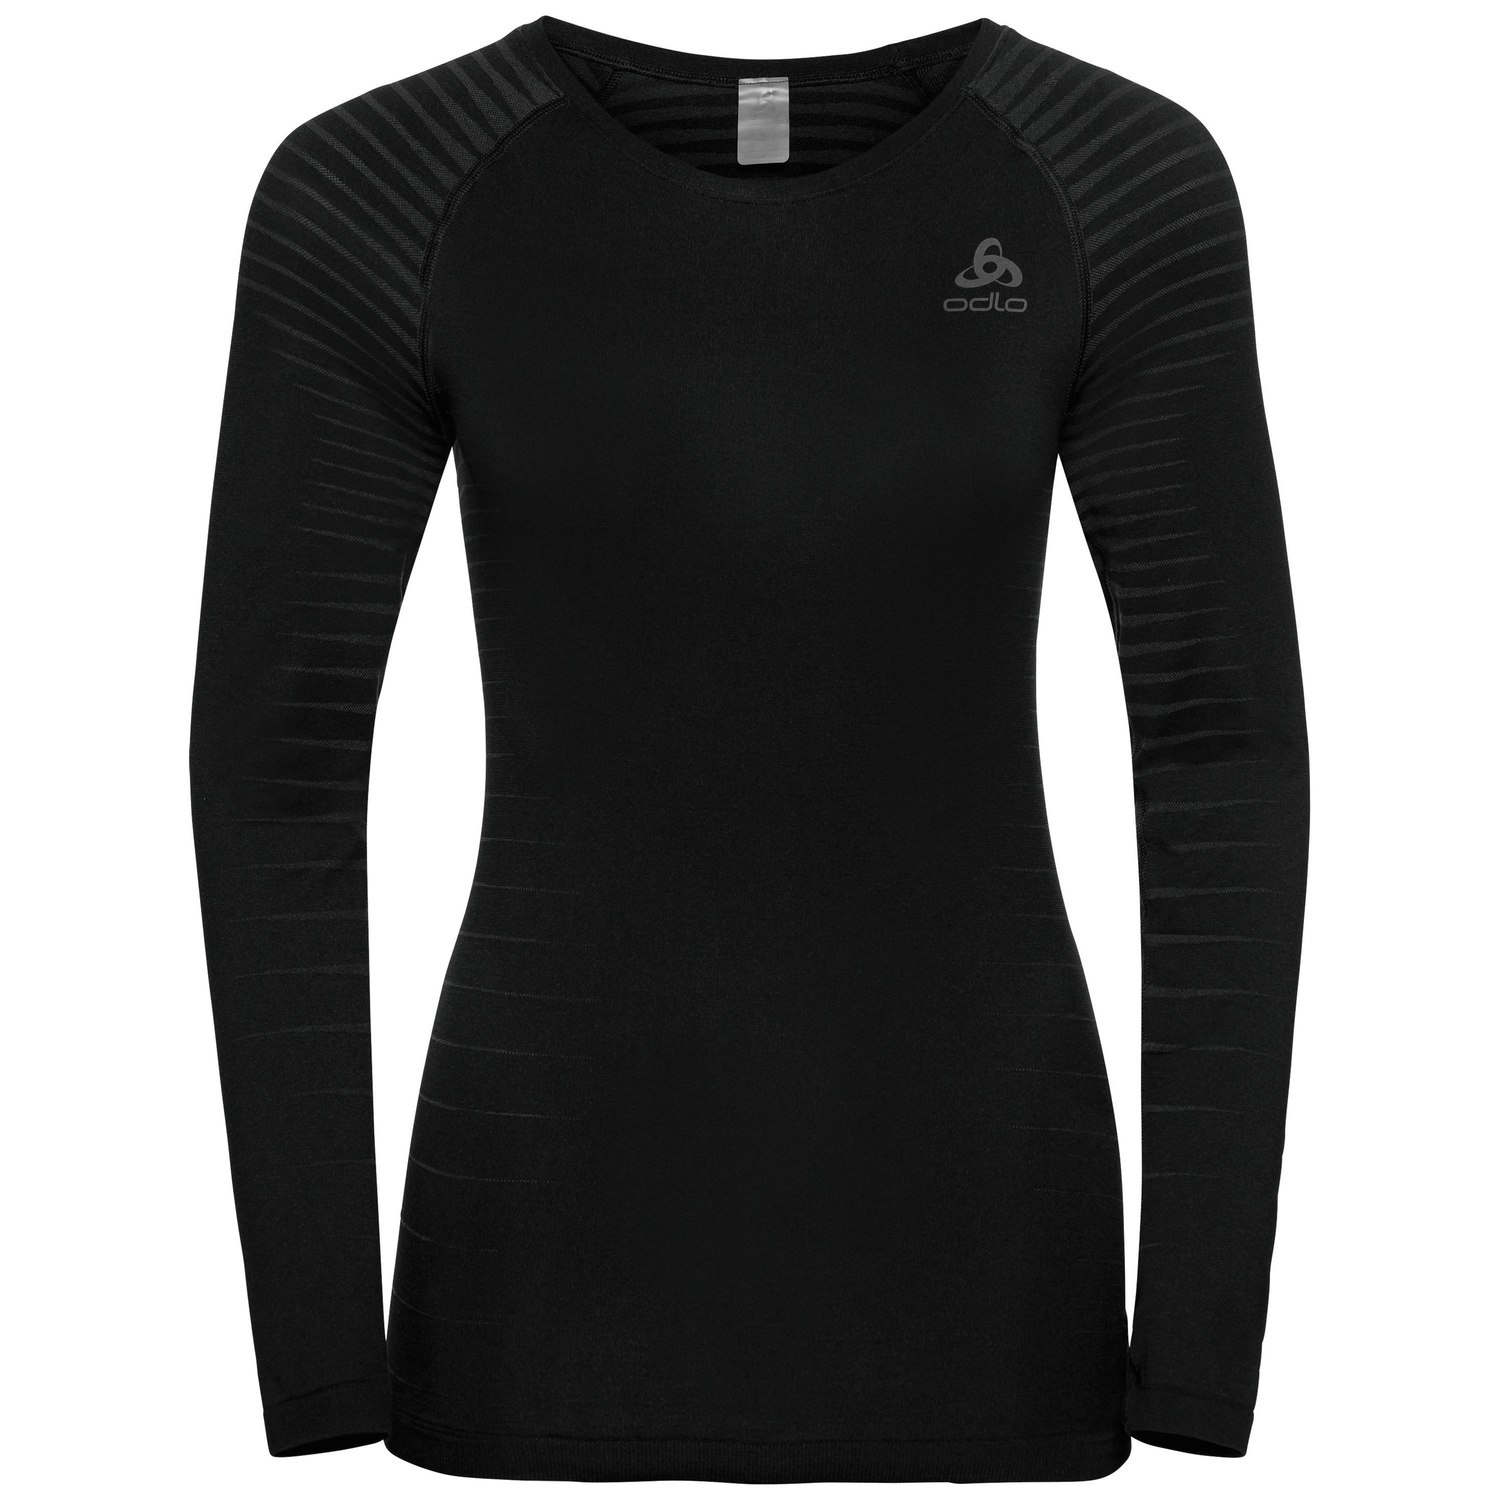 Picture of Odlo Performance Light Long-Sleeve Base Layer Top Women 188141 - black